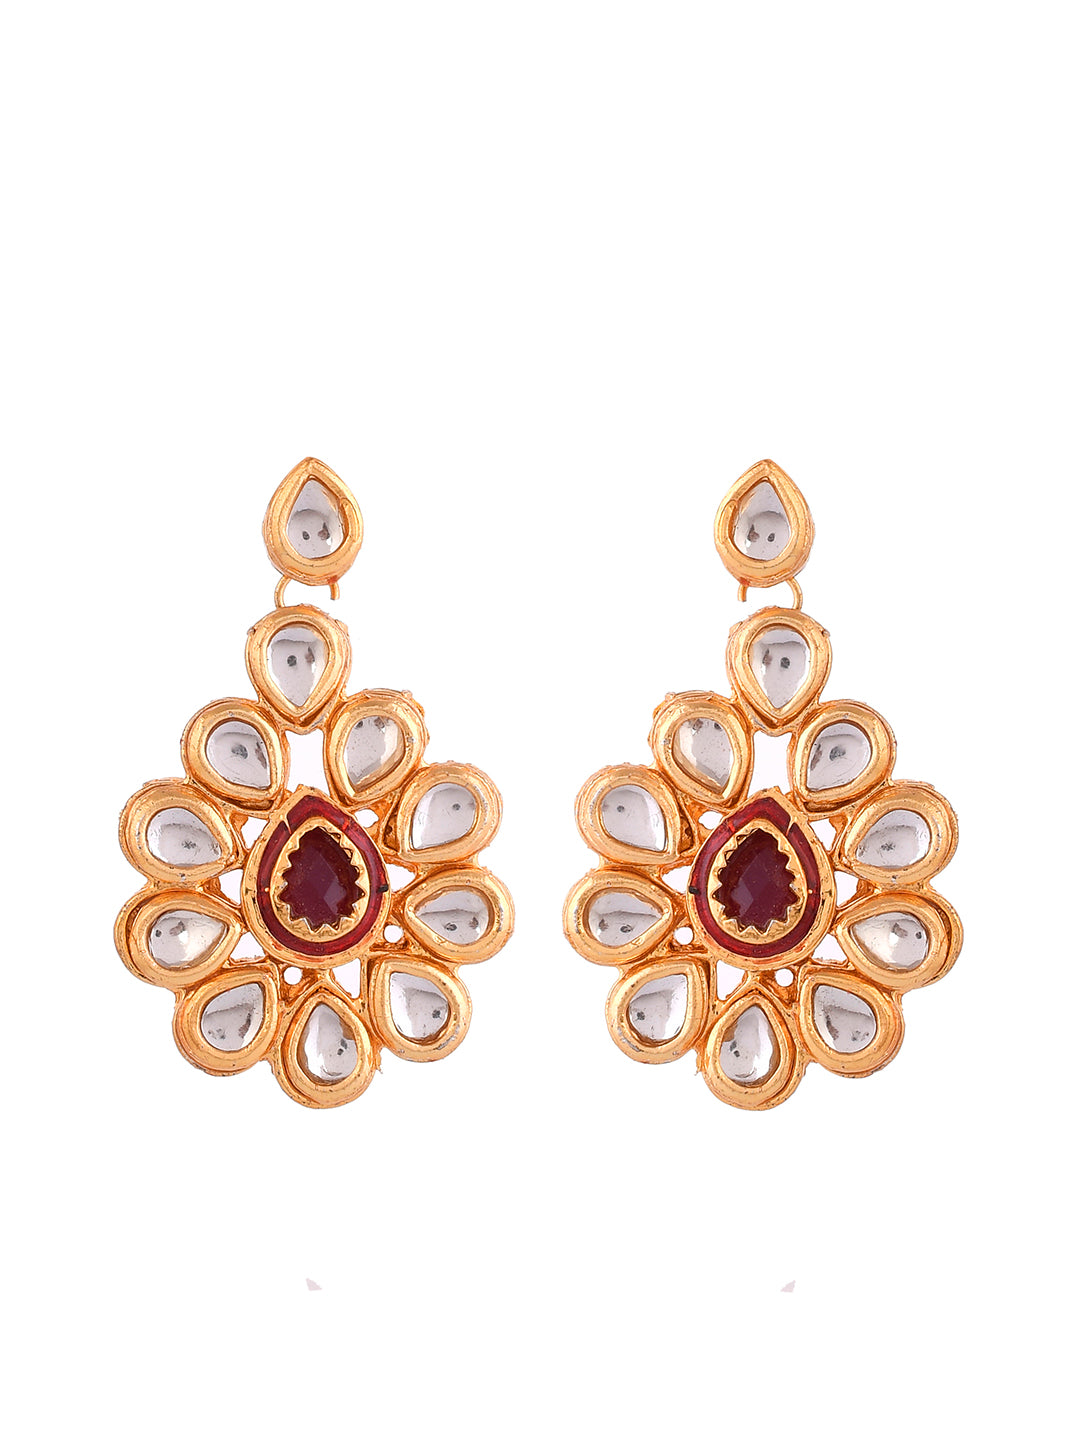 Elegant Gold-Plated Floral Earrings with Embedded Gemstones